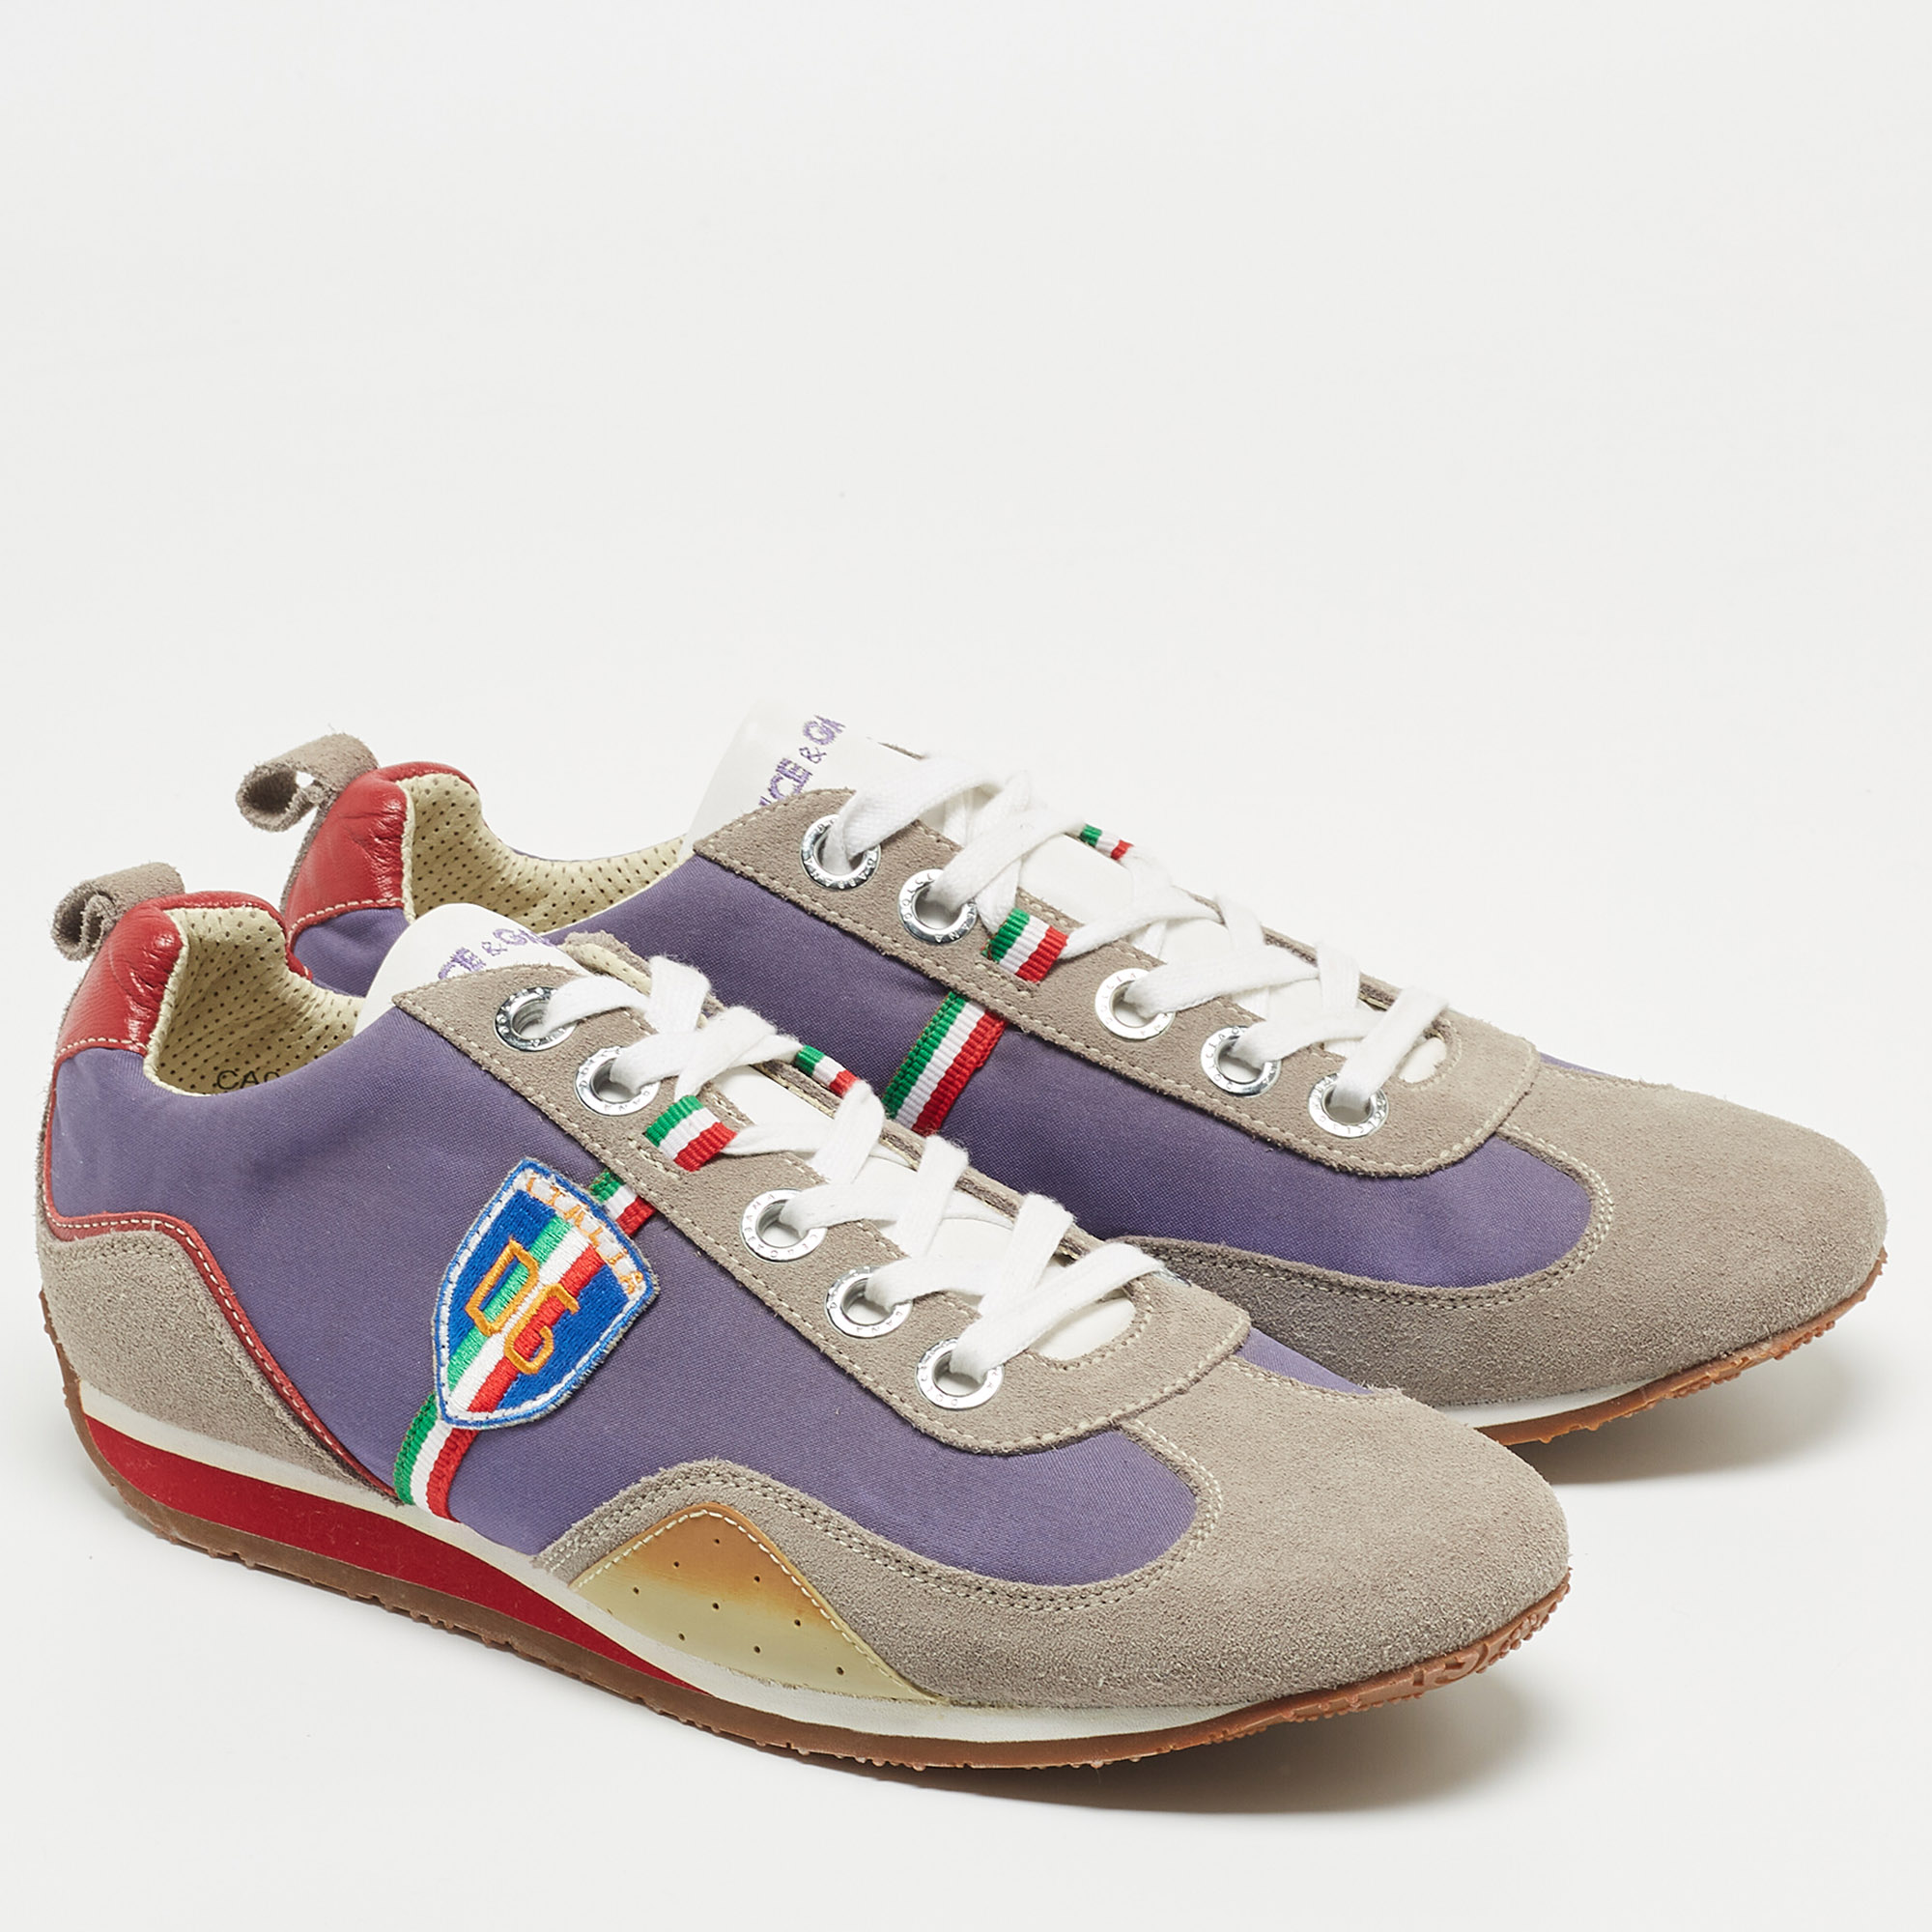 Dolce & Gabbana Multicolor Leather And Suede Low Top Sneakers Size 44.5